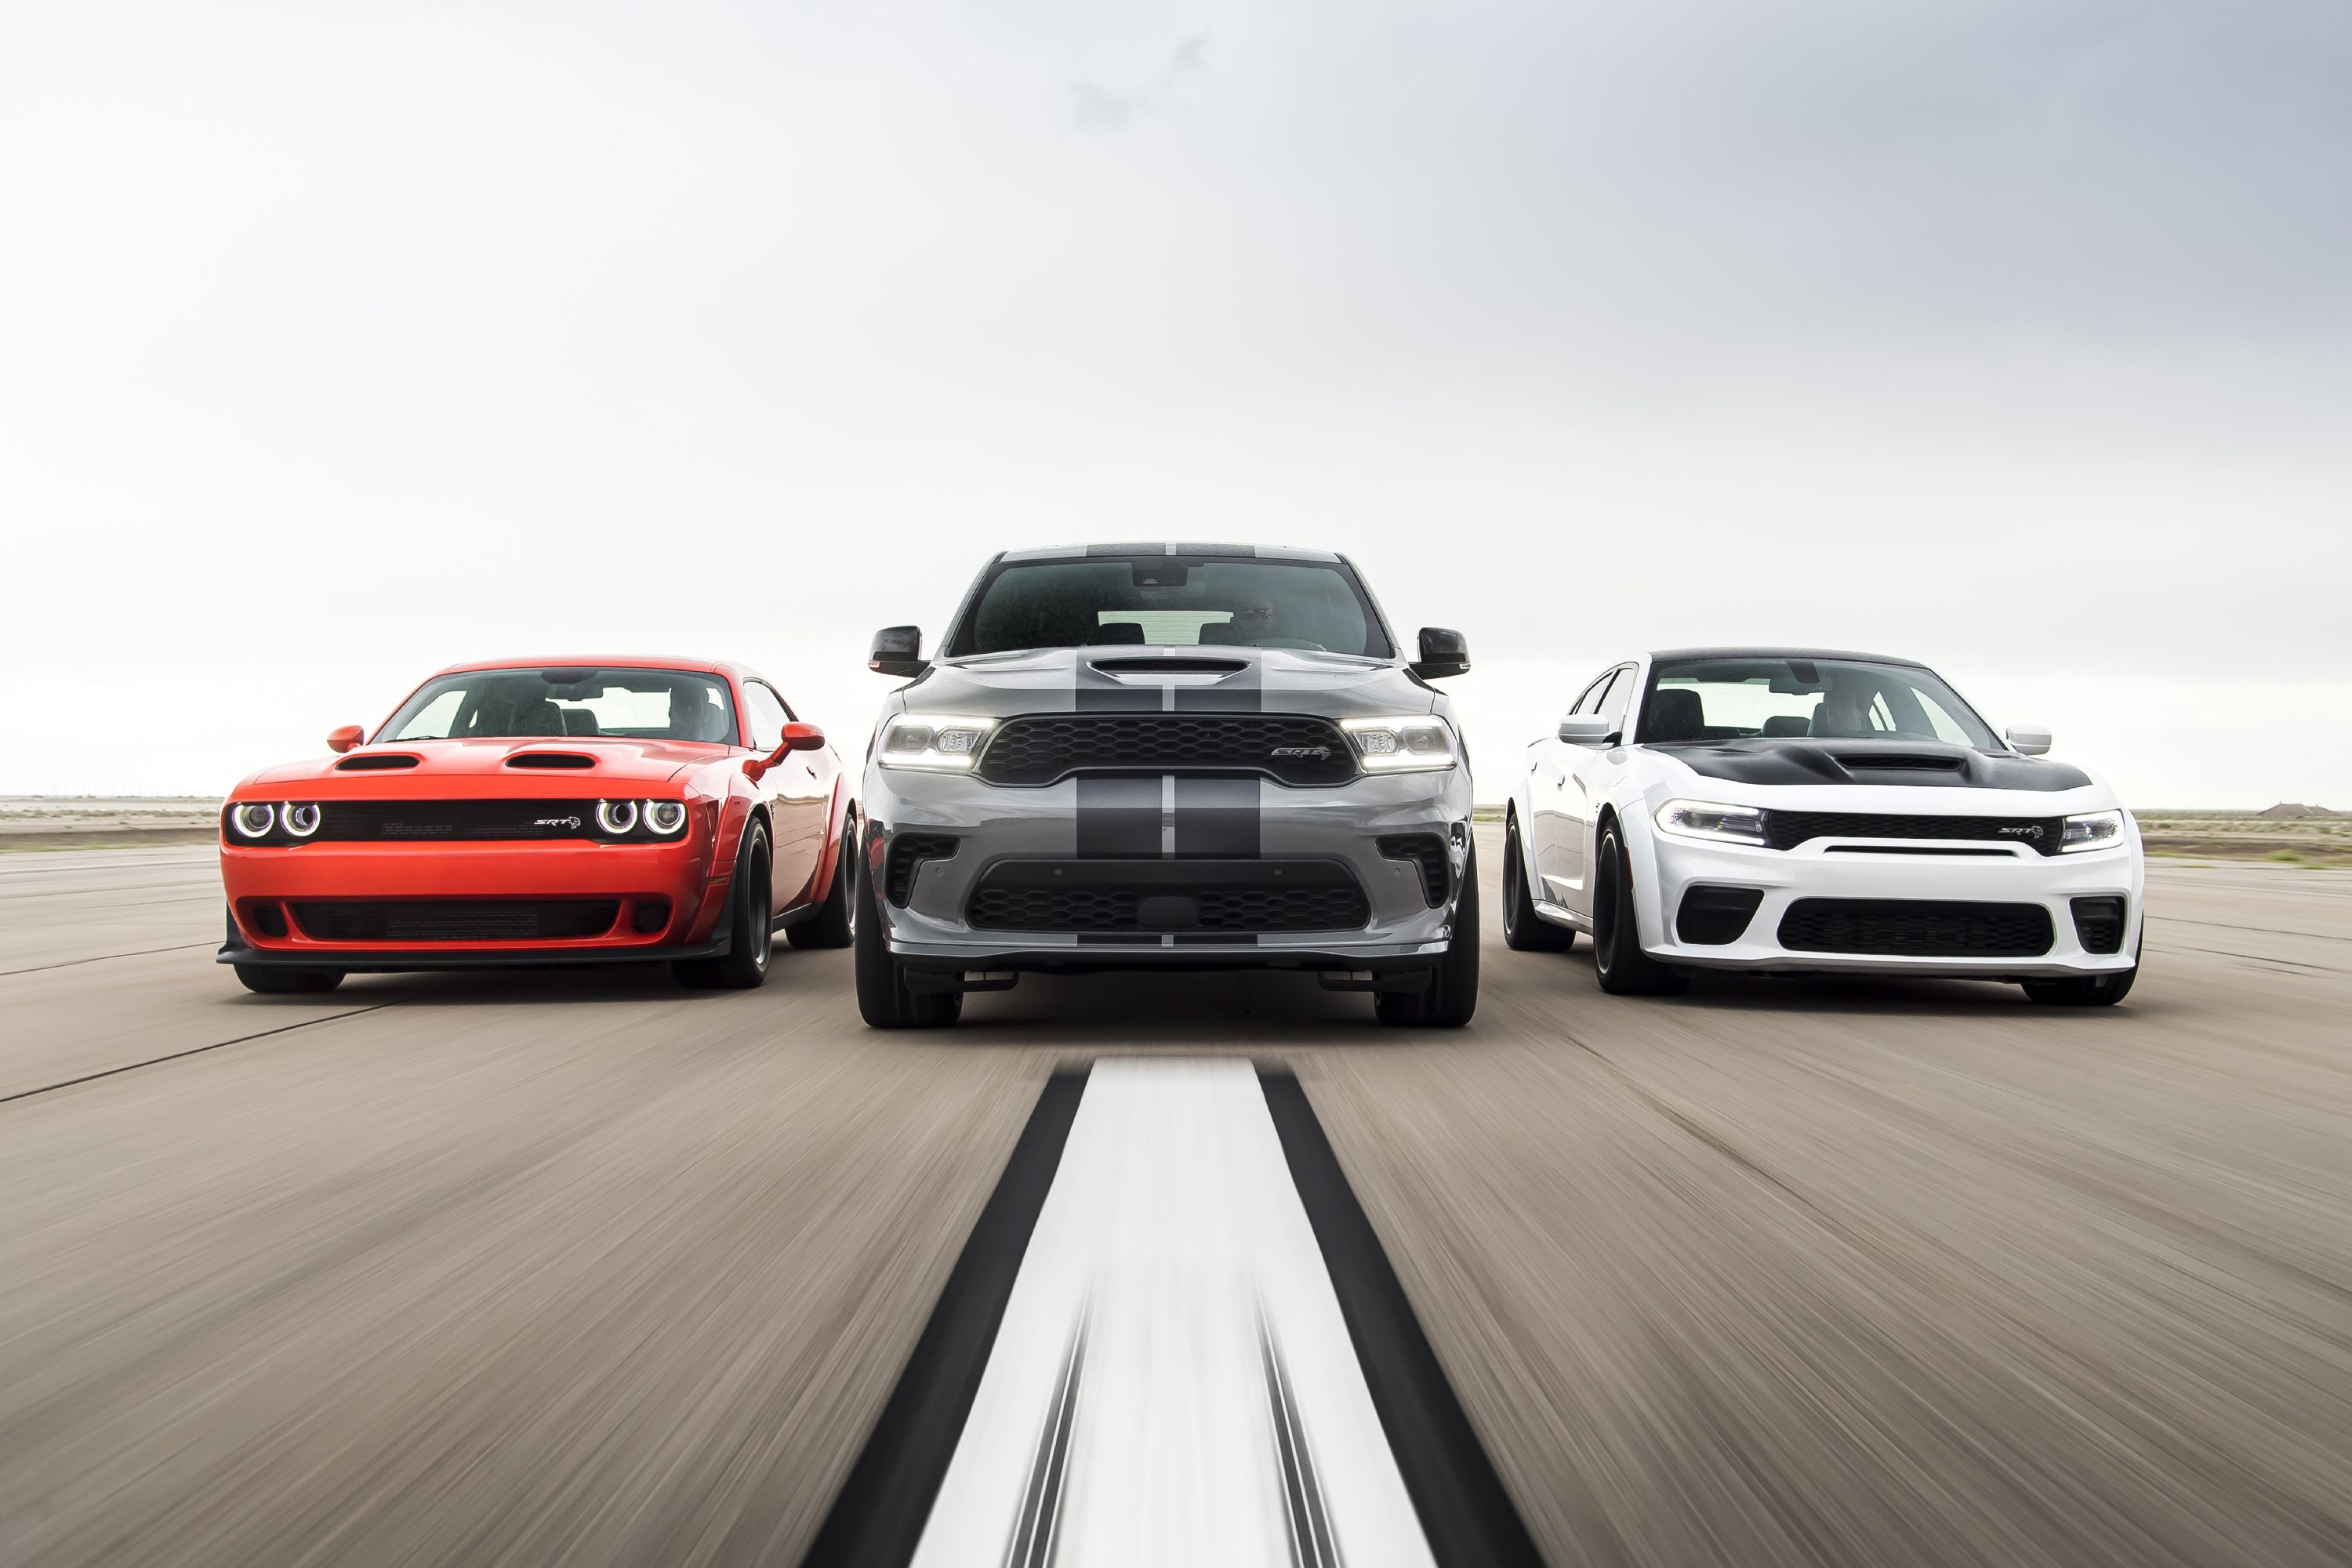 9 New Dodge Vehicles with at Least 9 HP Coming for 9